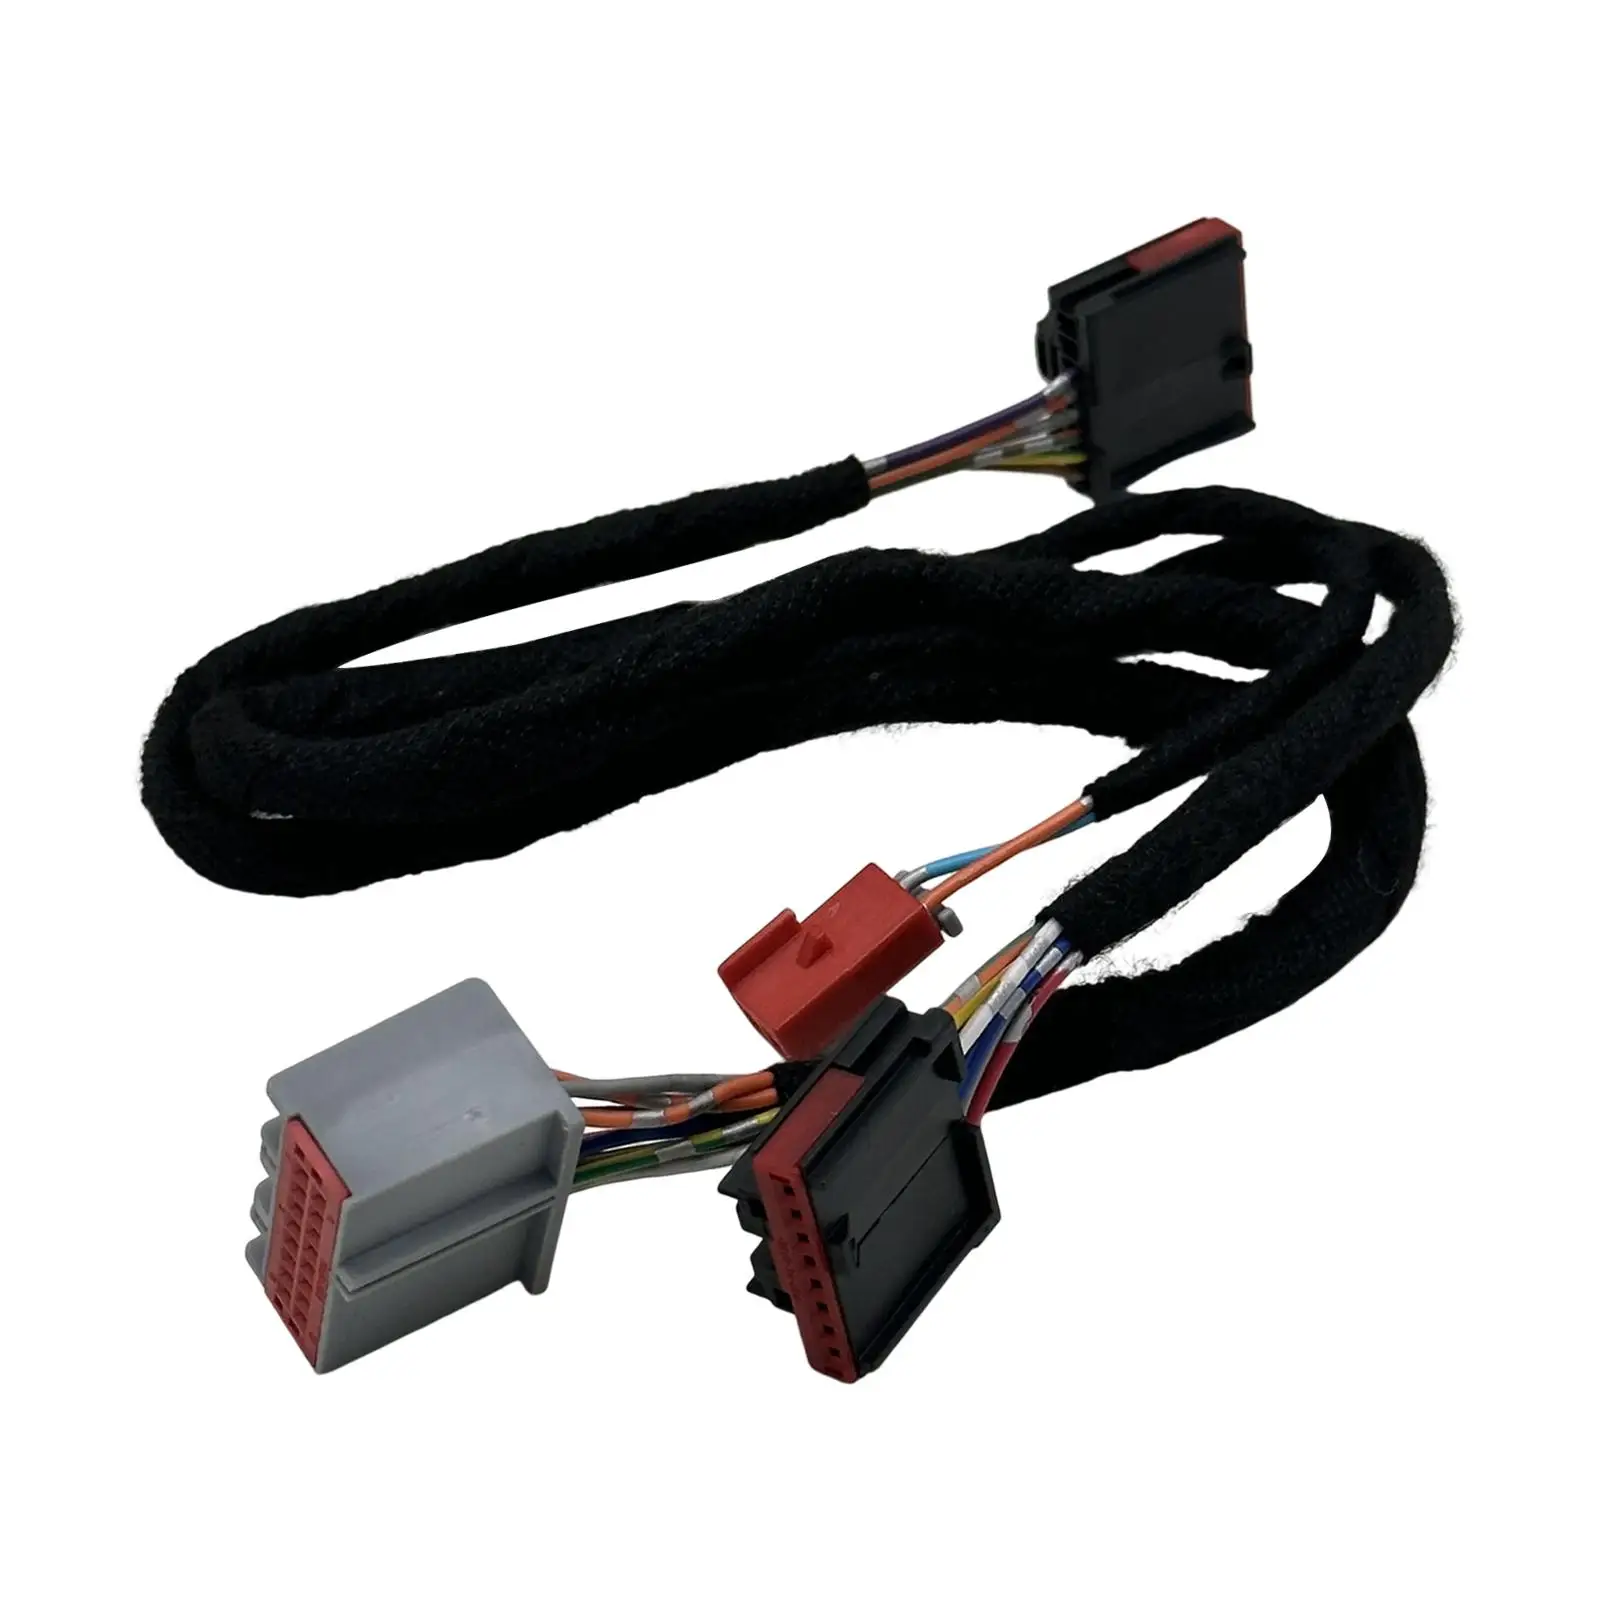 Steering Wheel Wiring Harness, Replacement, Car Accessories, High Performance, Premium, Spare Parts Durable for F250 F350 F450